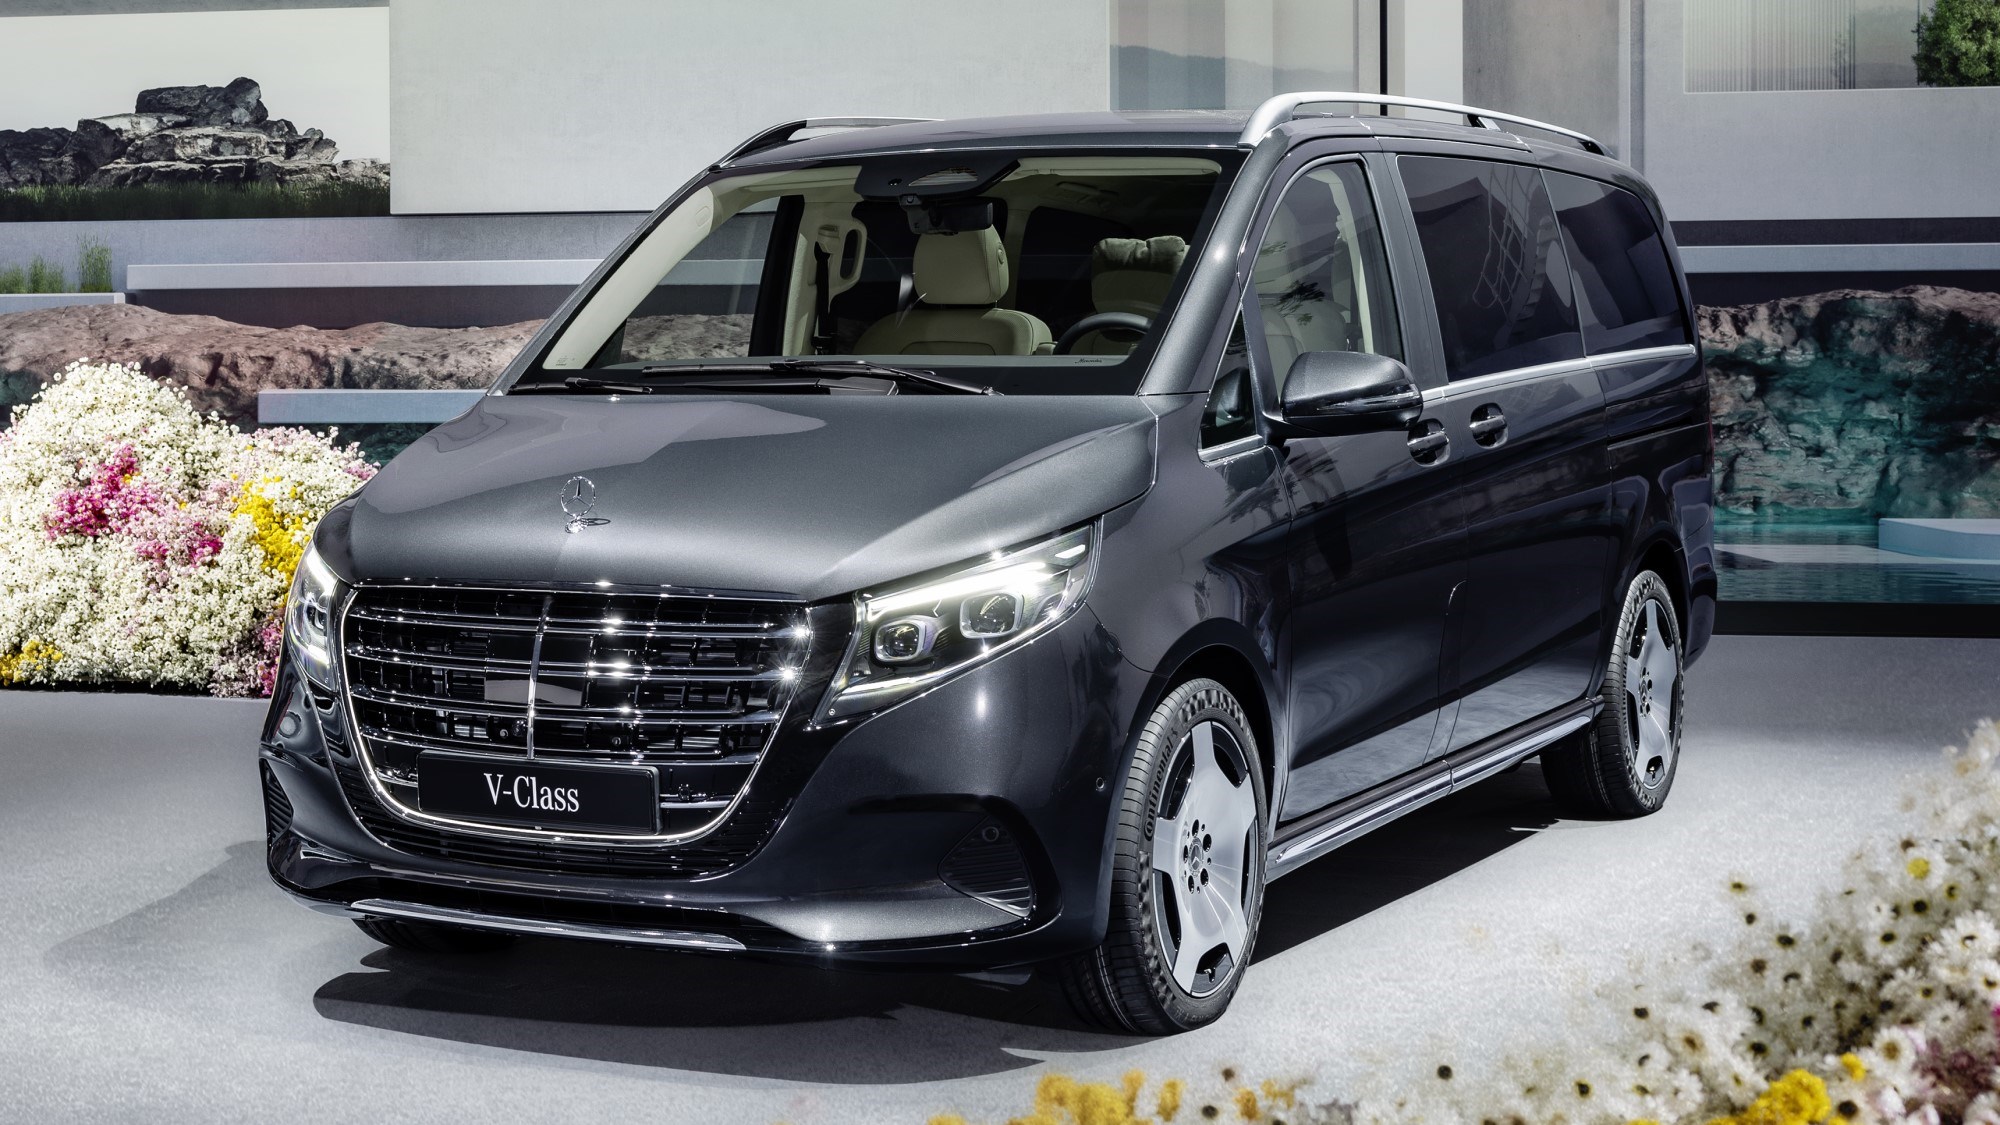 Mercedes Marco Polo updated, as V-Class promises S-Class lux in a van